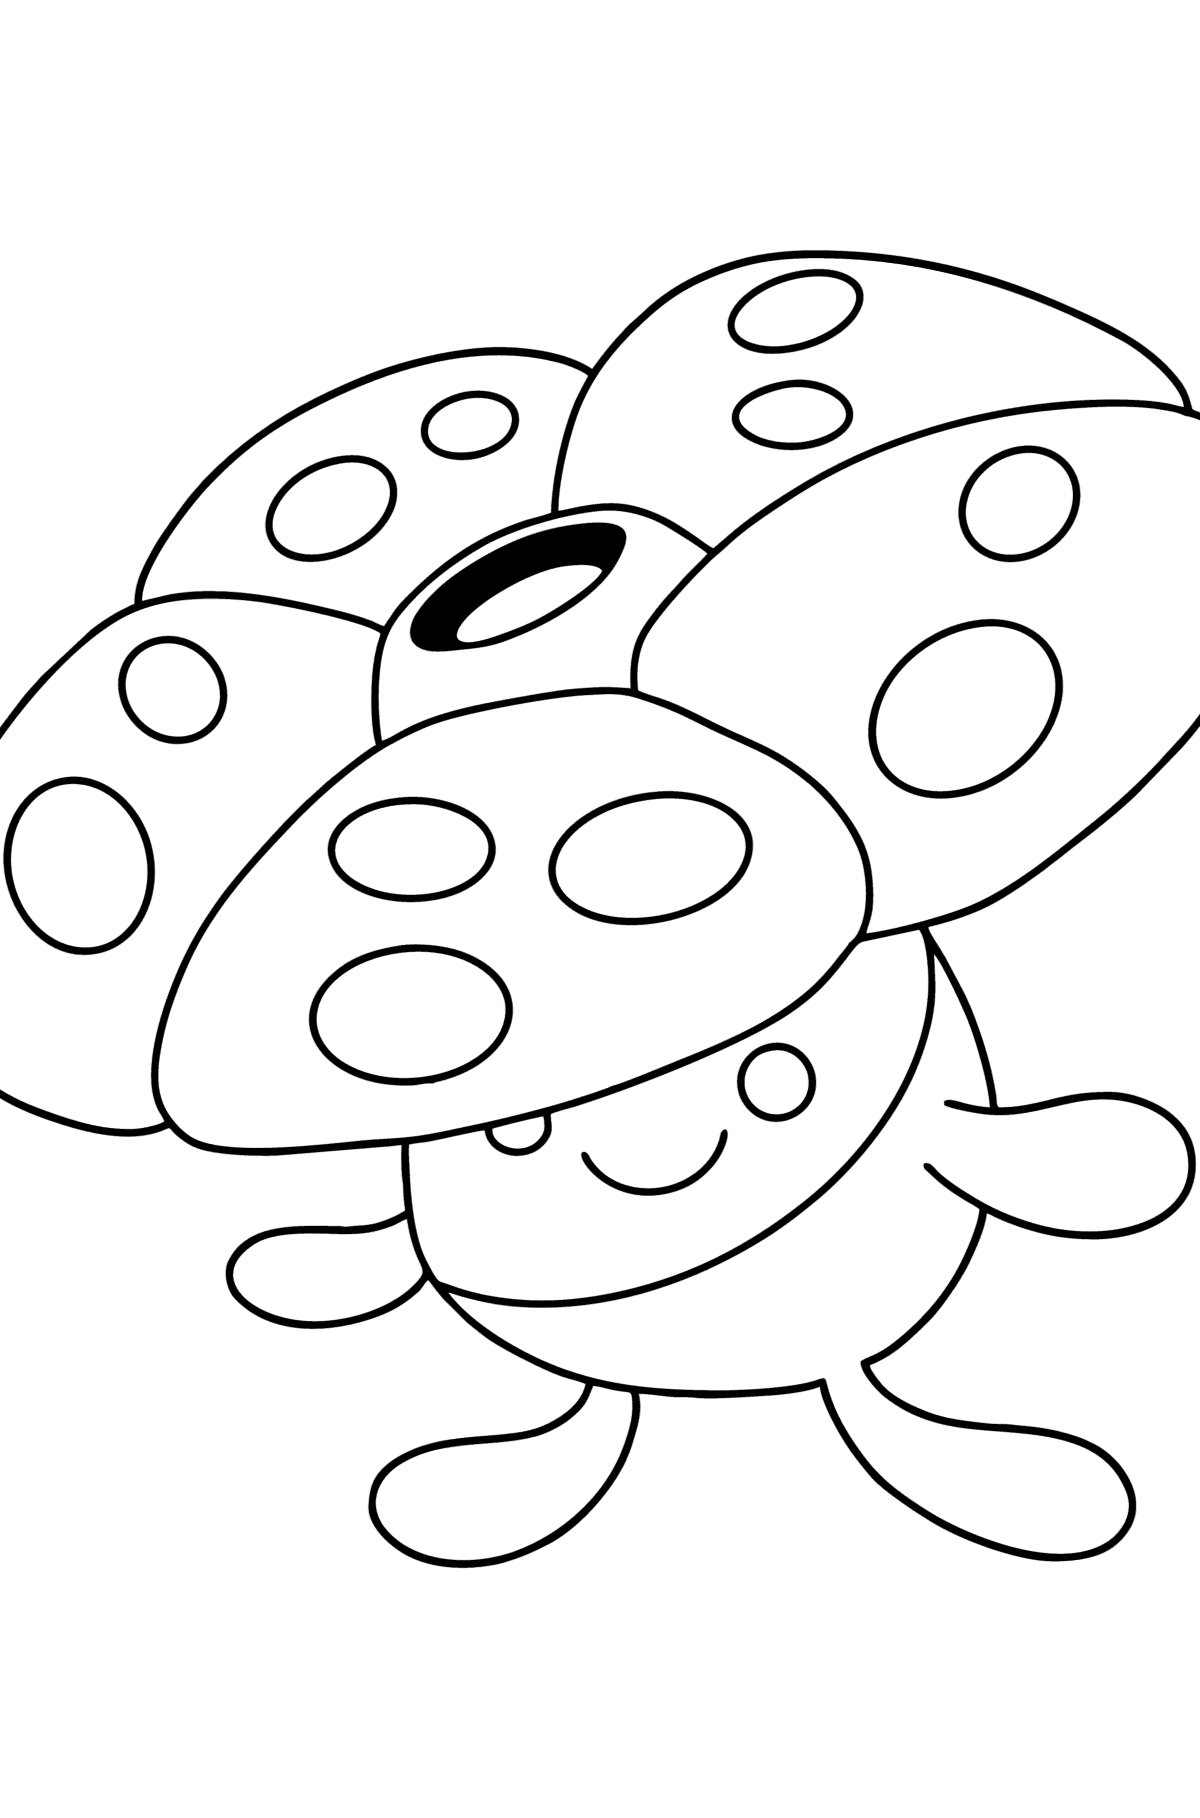 Coloring page Pokémon Go Vileplume - Coloring Pages for Kids